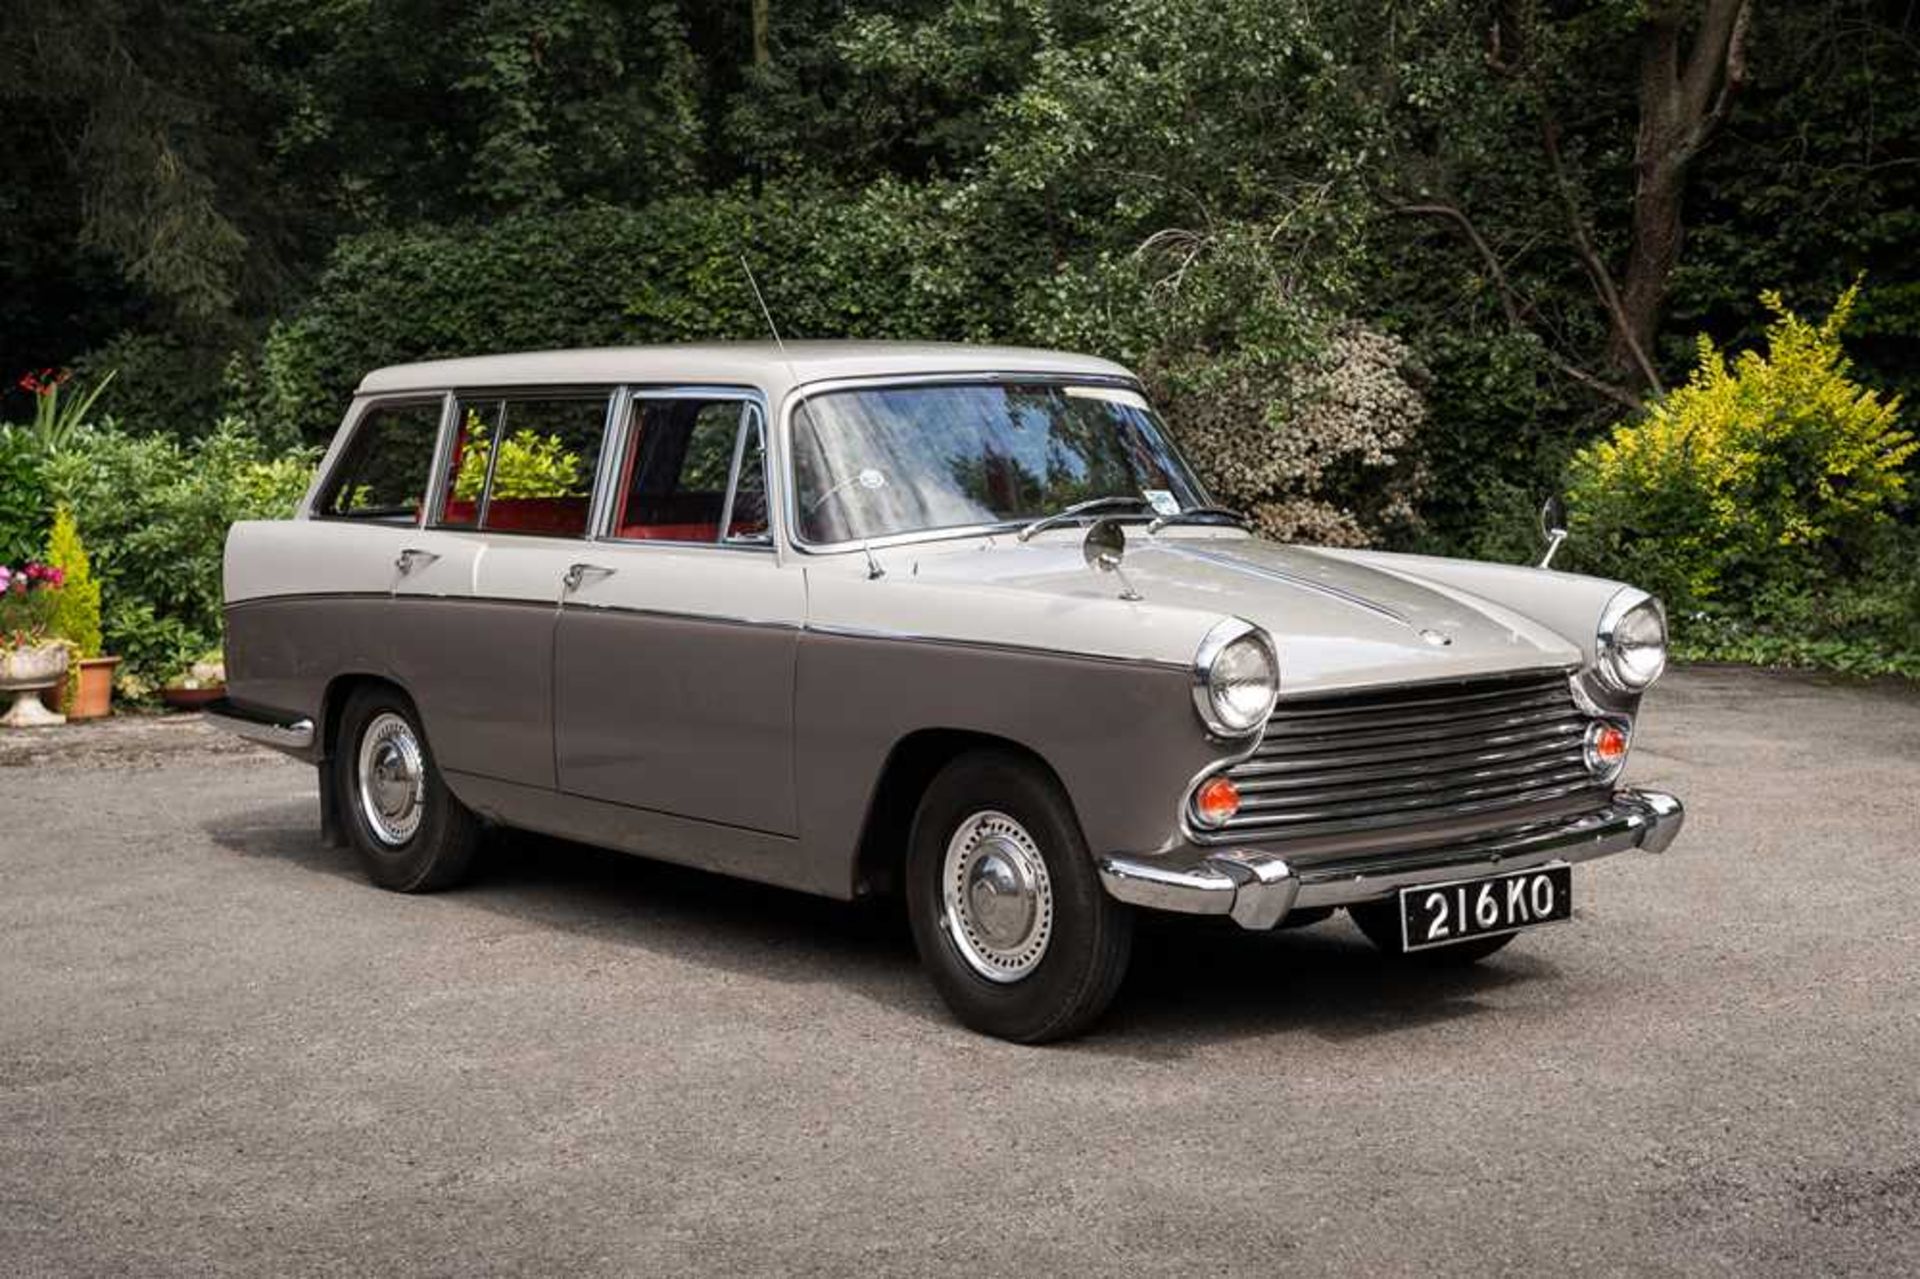 1964 Morris Oxford Series VI Farina Traveller Just 7,000 miles from new - Image 96 of 98